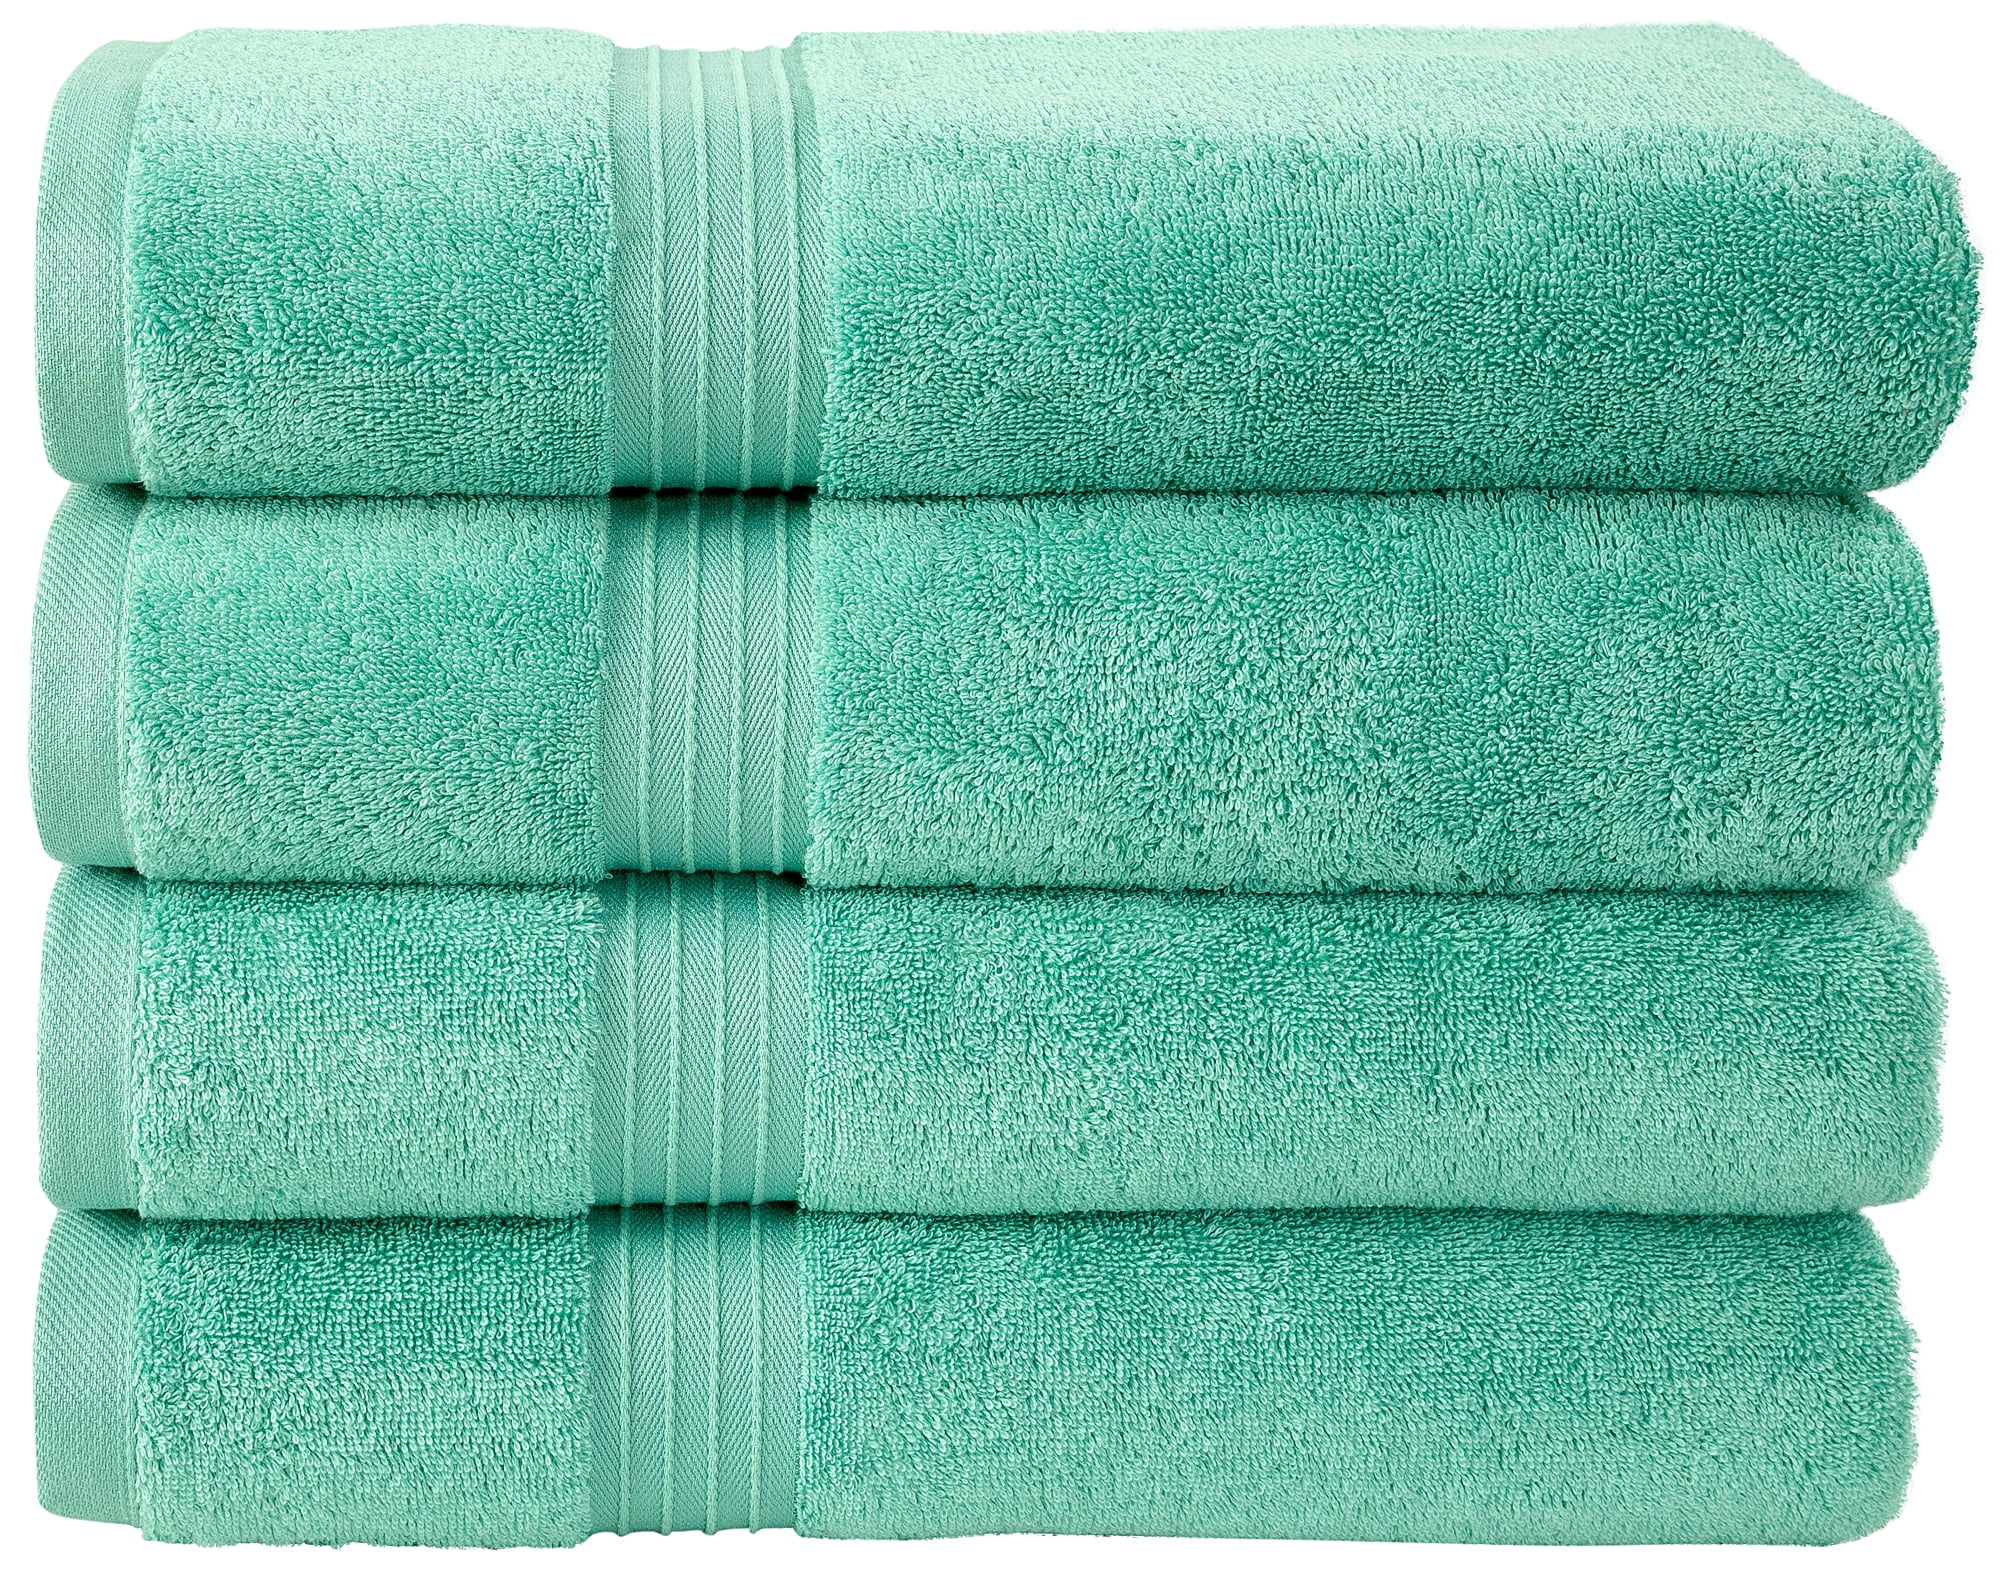 Details about   Soft and Highly Absorbent 6 Pack Bath Towels Set 100% Cotton 600 GSM  Four Color 